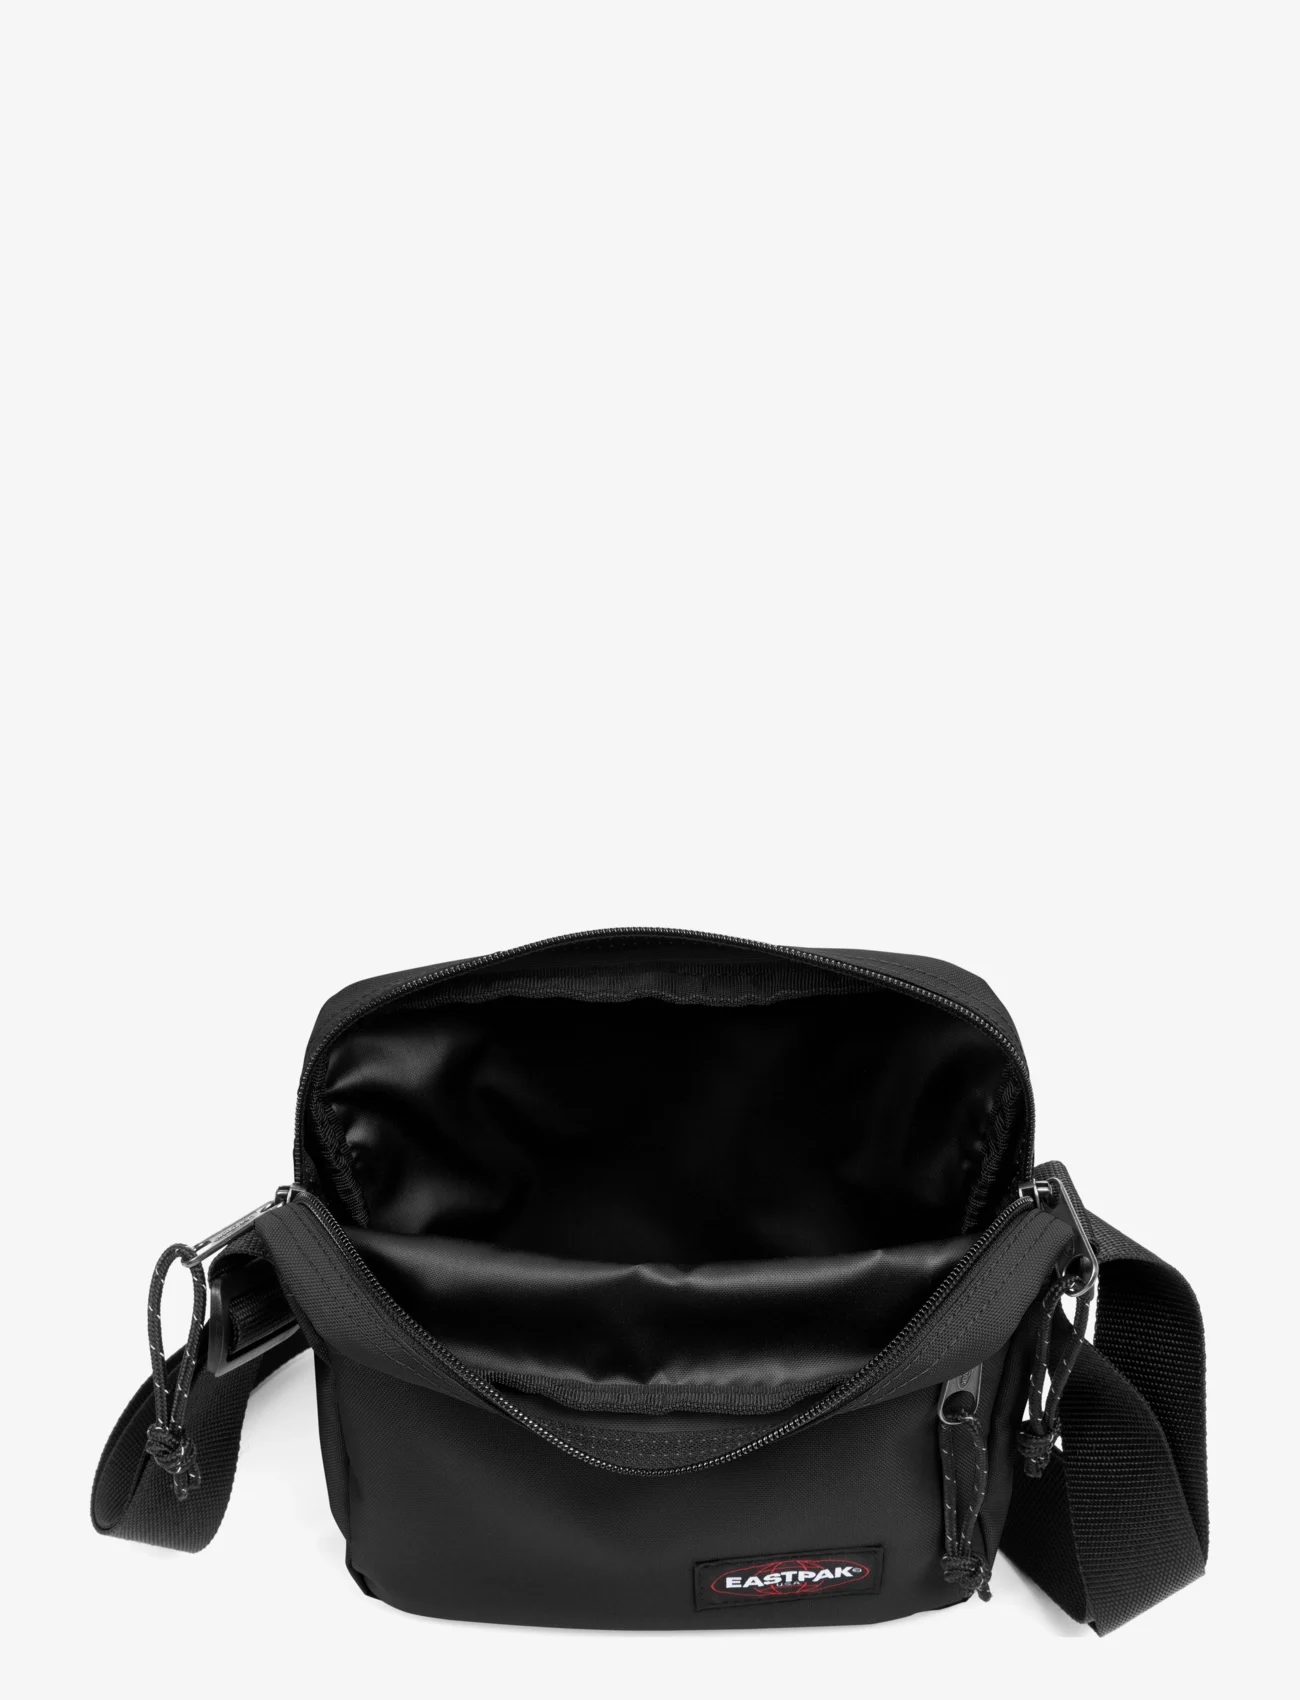 Eastpak - THE BIGGER ONE - lowest prices - black - 1